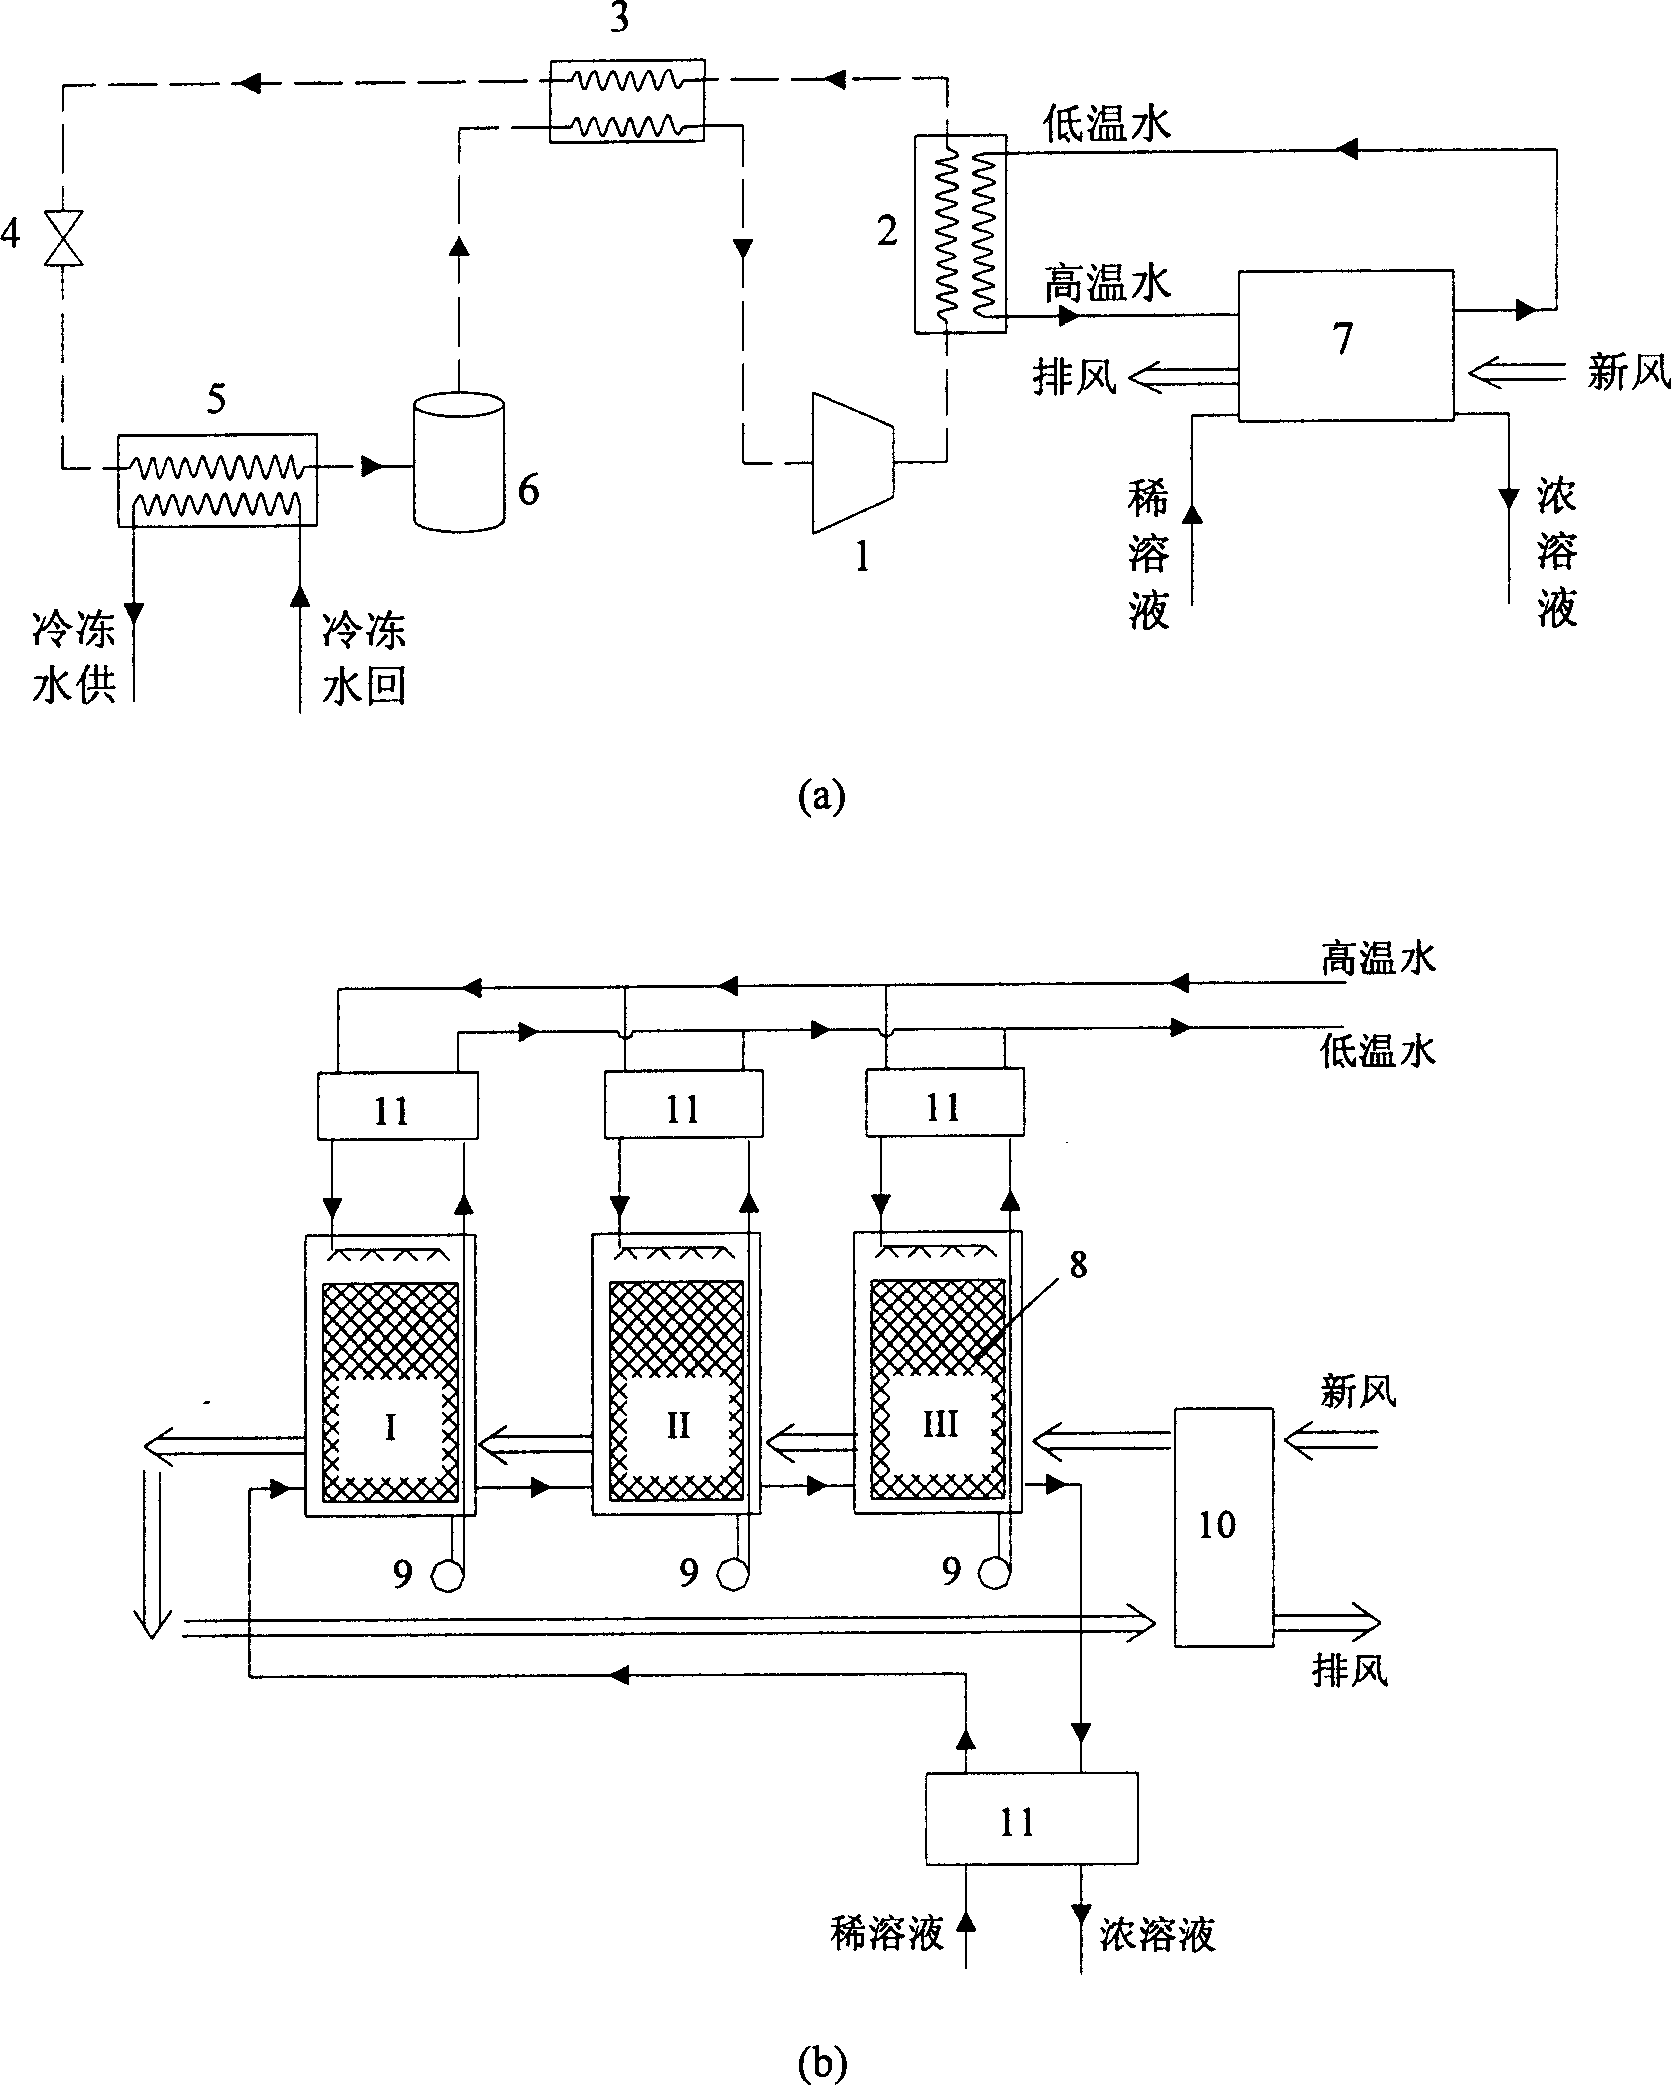 Air-conditioner system with carbon dioxide supercritical circulating hot pump and solution dehumidification combination